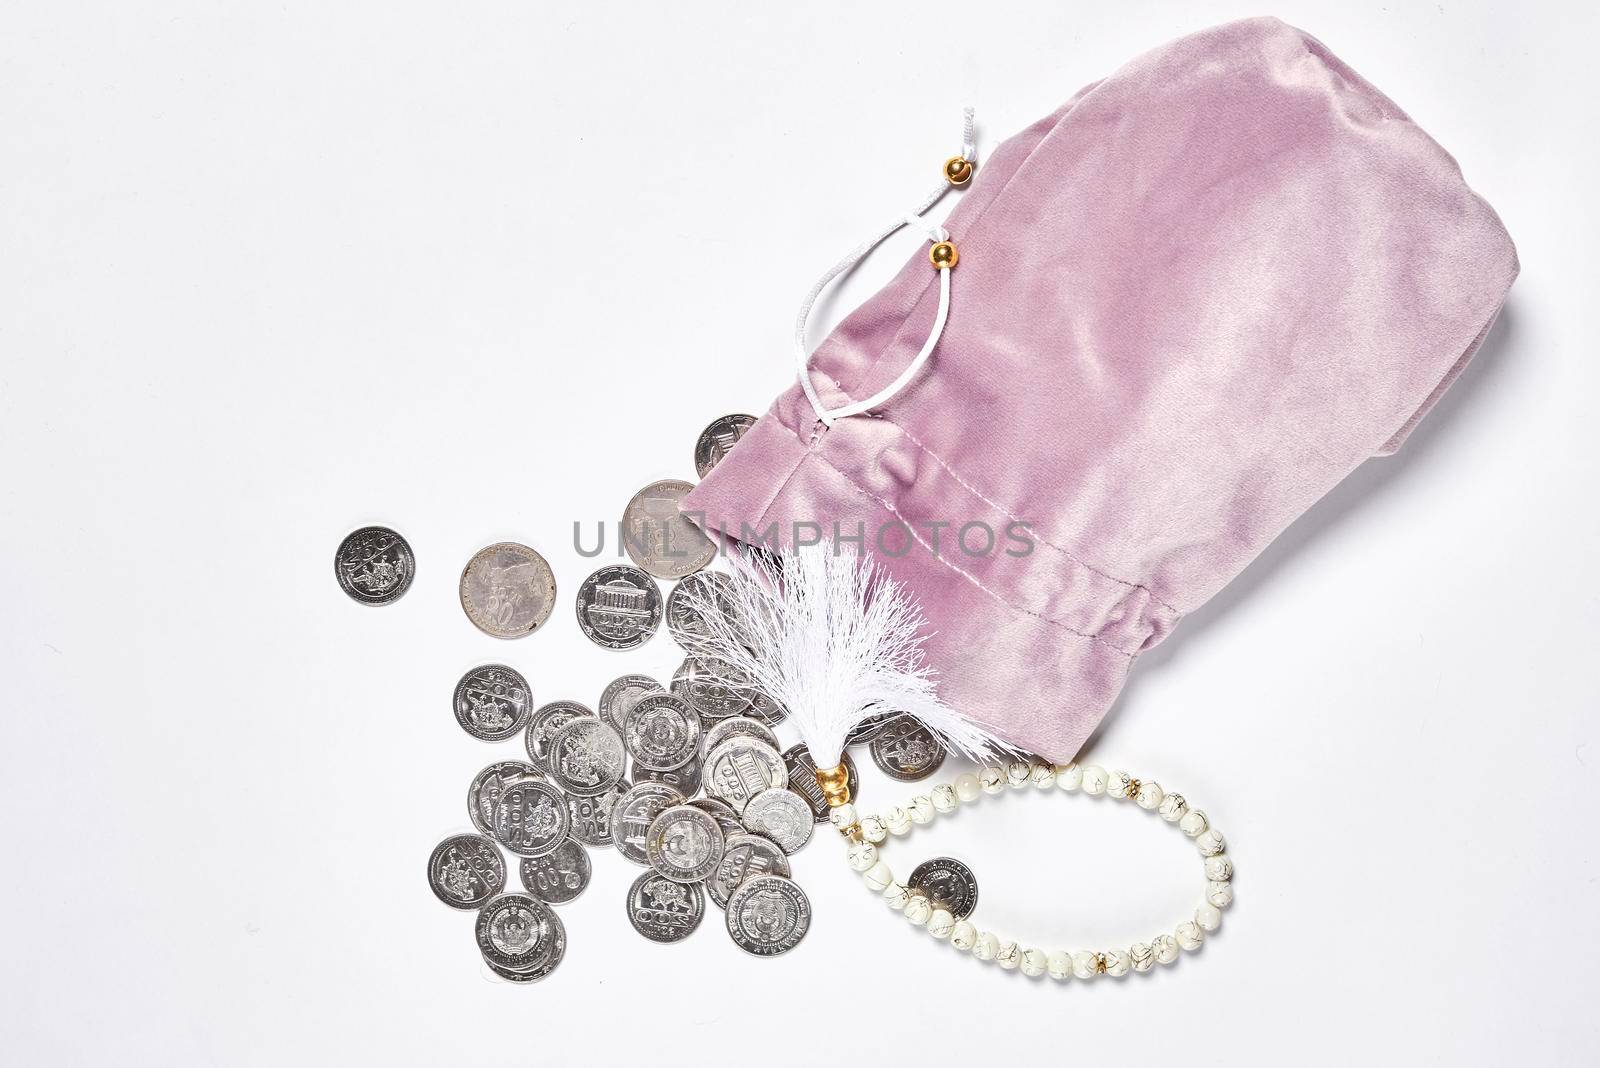 Concept of islamic finance on white background. Sharia-compliant finance - banking or financing activity. Coins and praying beads. Zakat, islamic banking